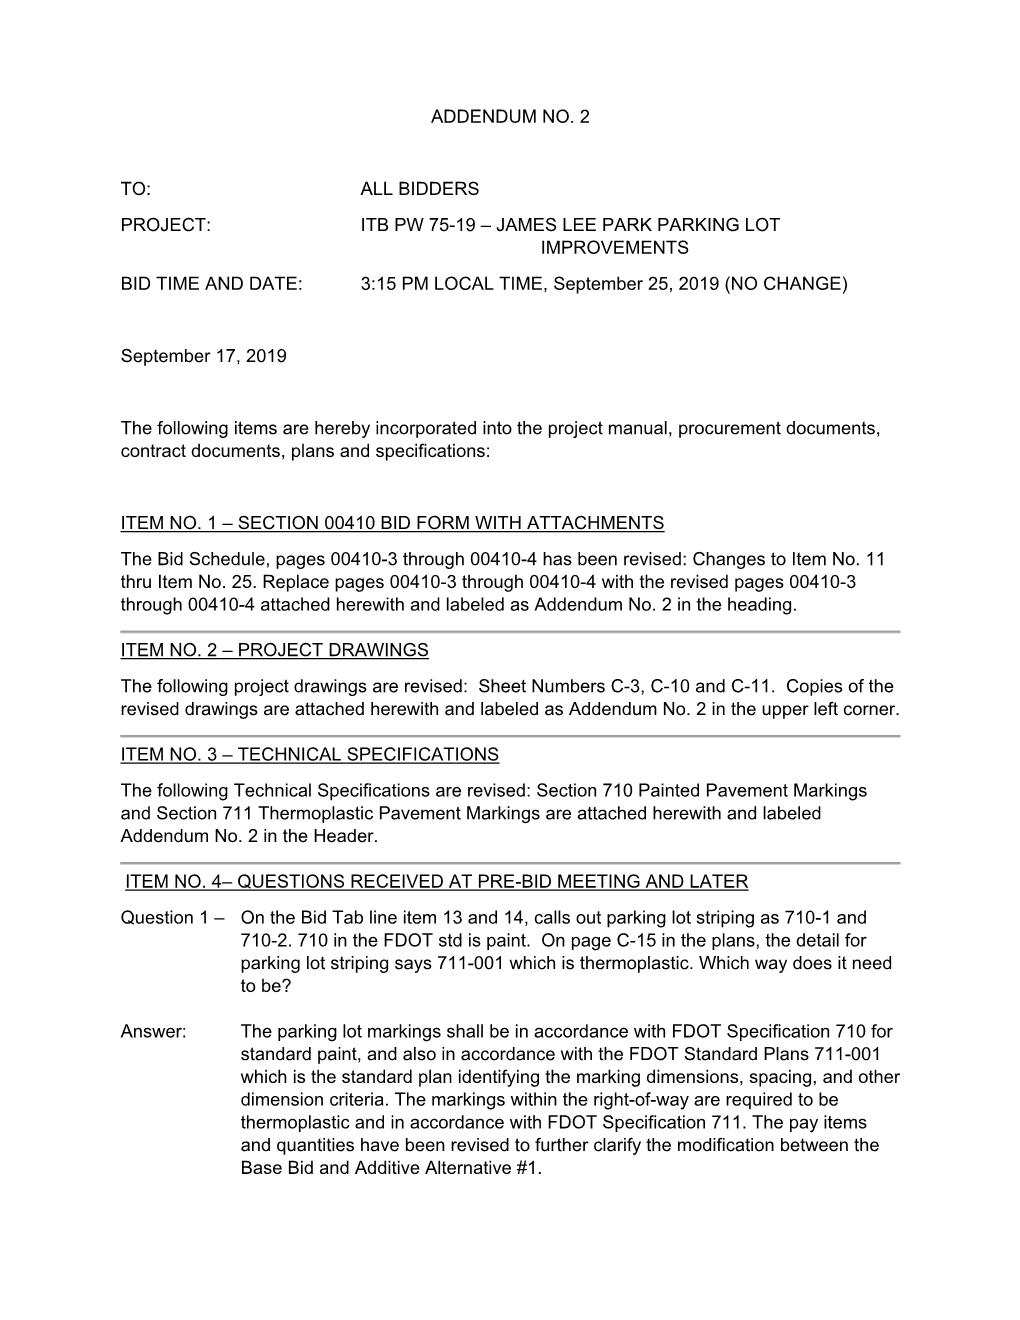 ITB PW 75-19 – JAMES LEE PARK PARKING LOT IMPROVEMENTS BID TIME and DATE: 3:15 PM LOCAL TIME, September 25, 2019 (NO CHANGE)